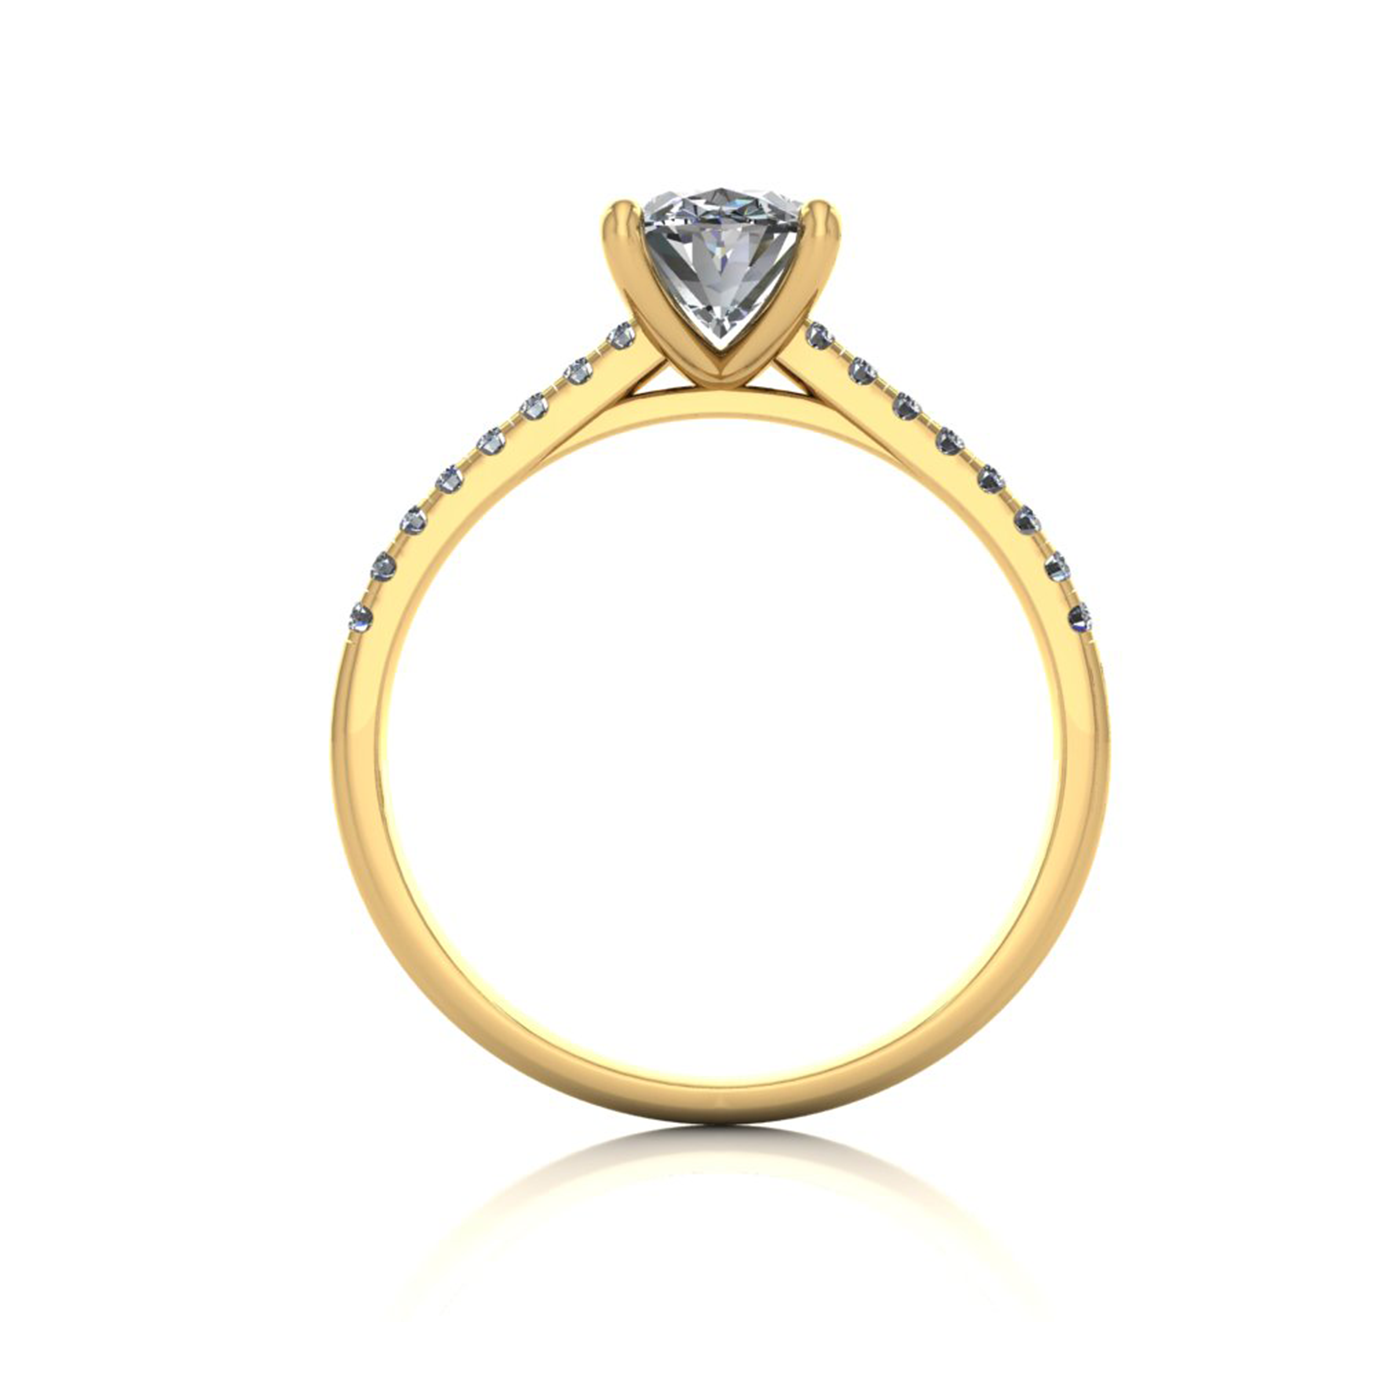 18k yellow gold  1,00 ct 4 prongs oval cut diamond engagement ring with whisper thin pavÉ set band